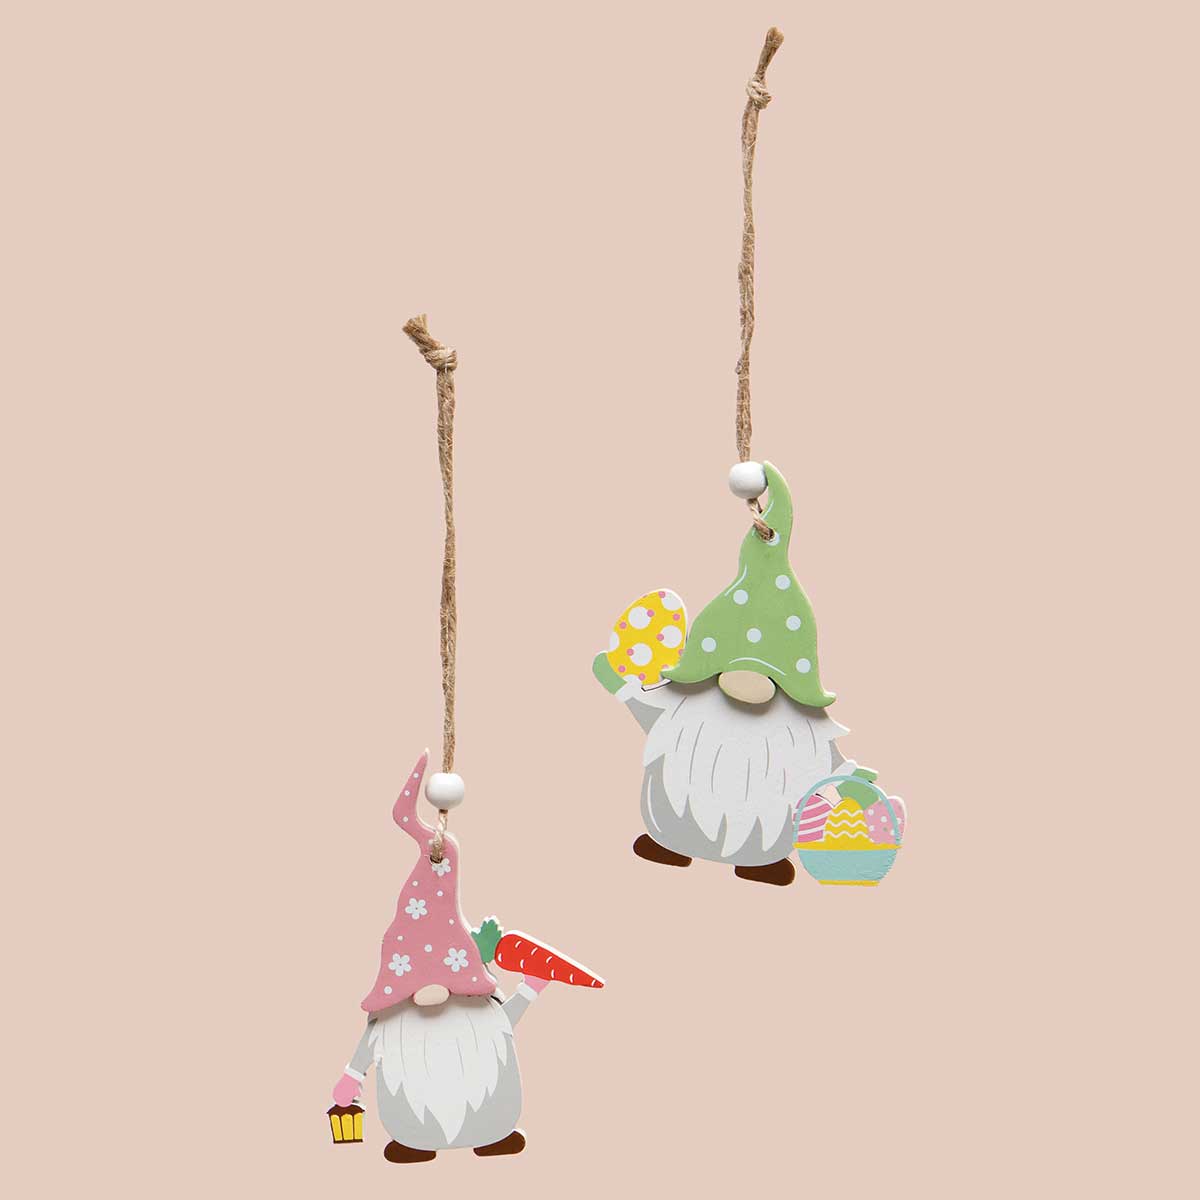 !Easter Gnomes Ornament with Carrot/Eggs